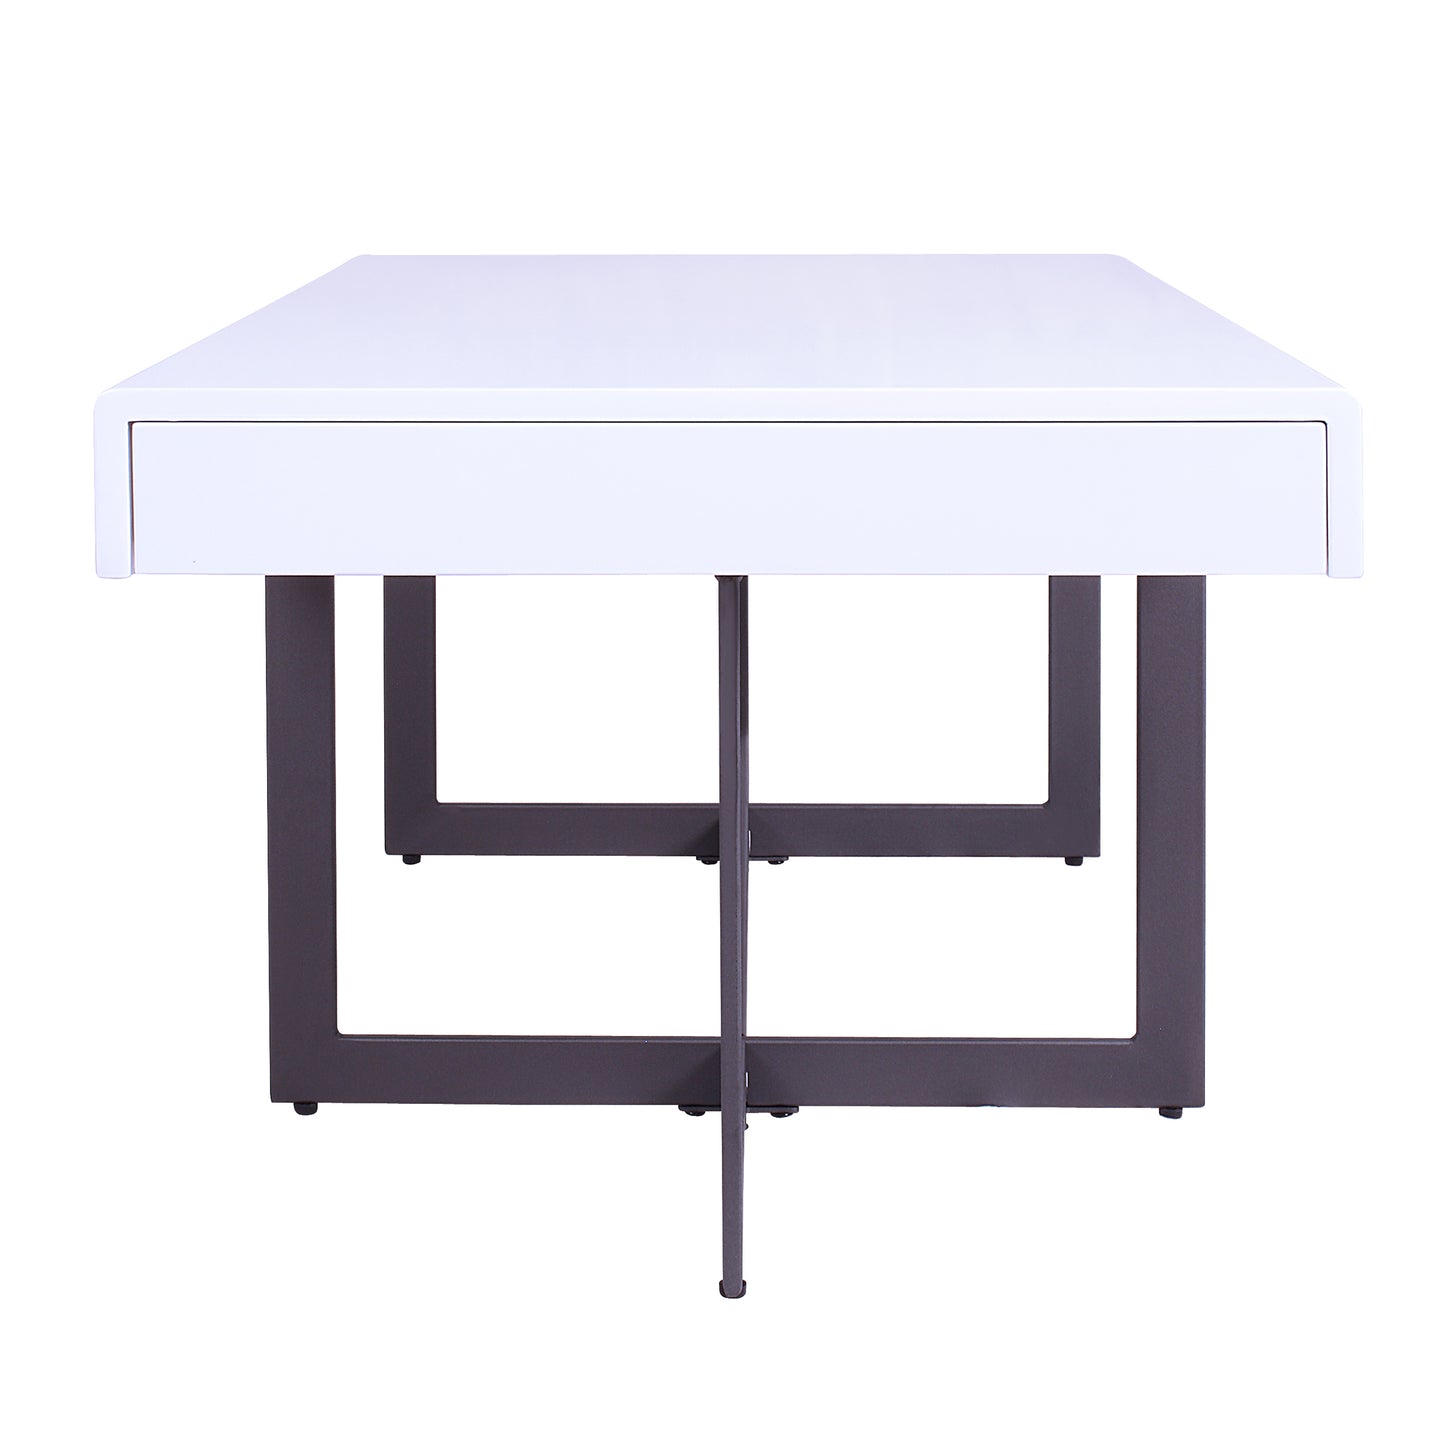 Front-facing coffee table only side view from a two-piece modern white high gloss and gunmetal storage coffee table set with hidden drawers on a white background